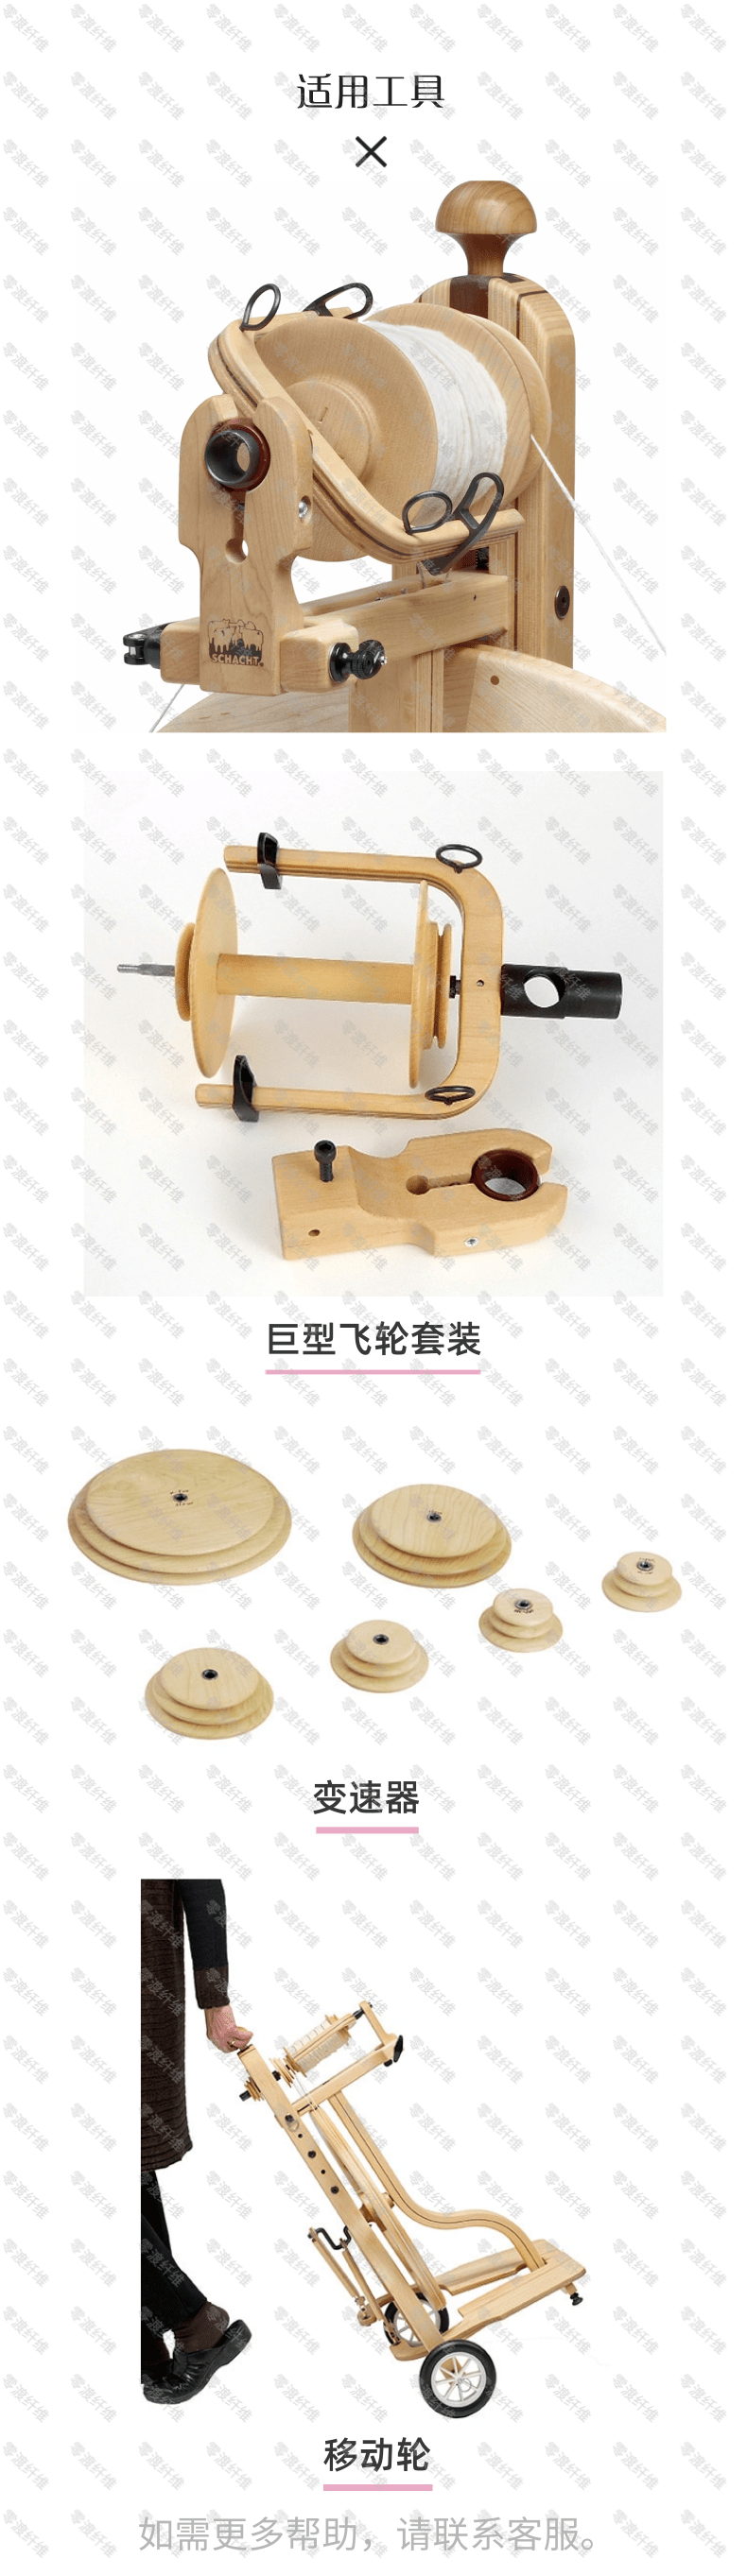 Matchless Spinning Wheel_4@鍑＄蹇浘.png